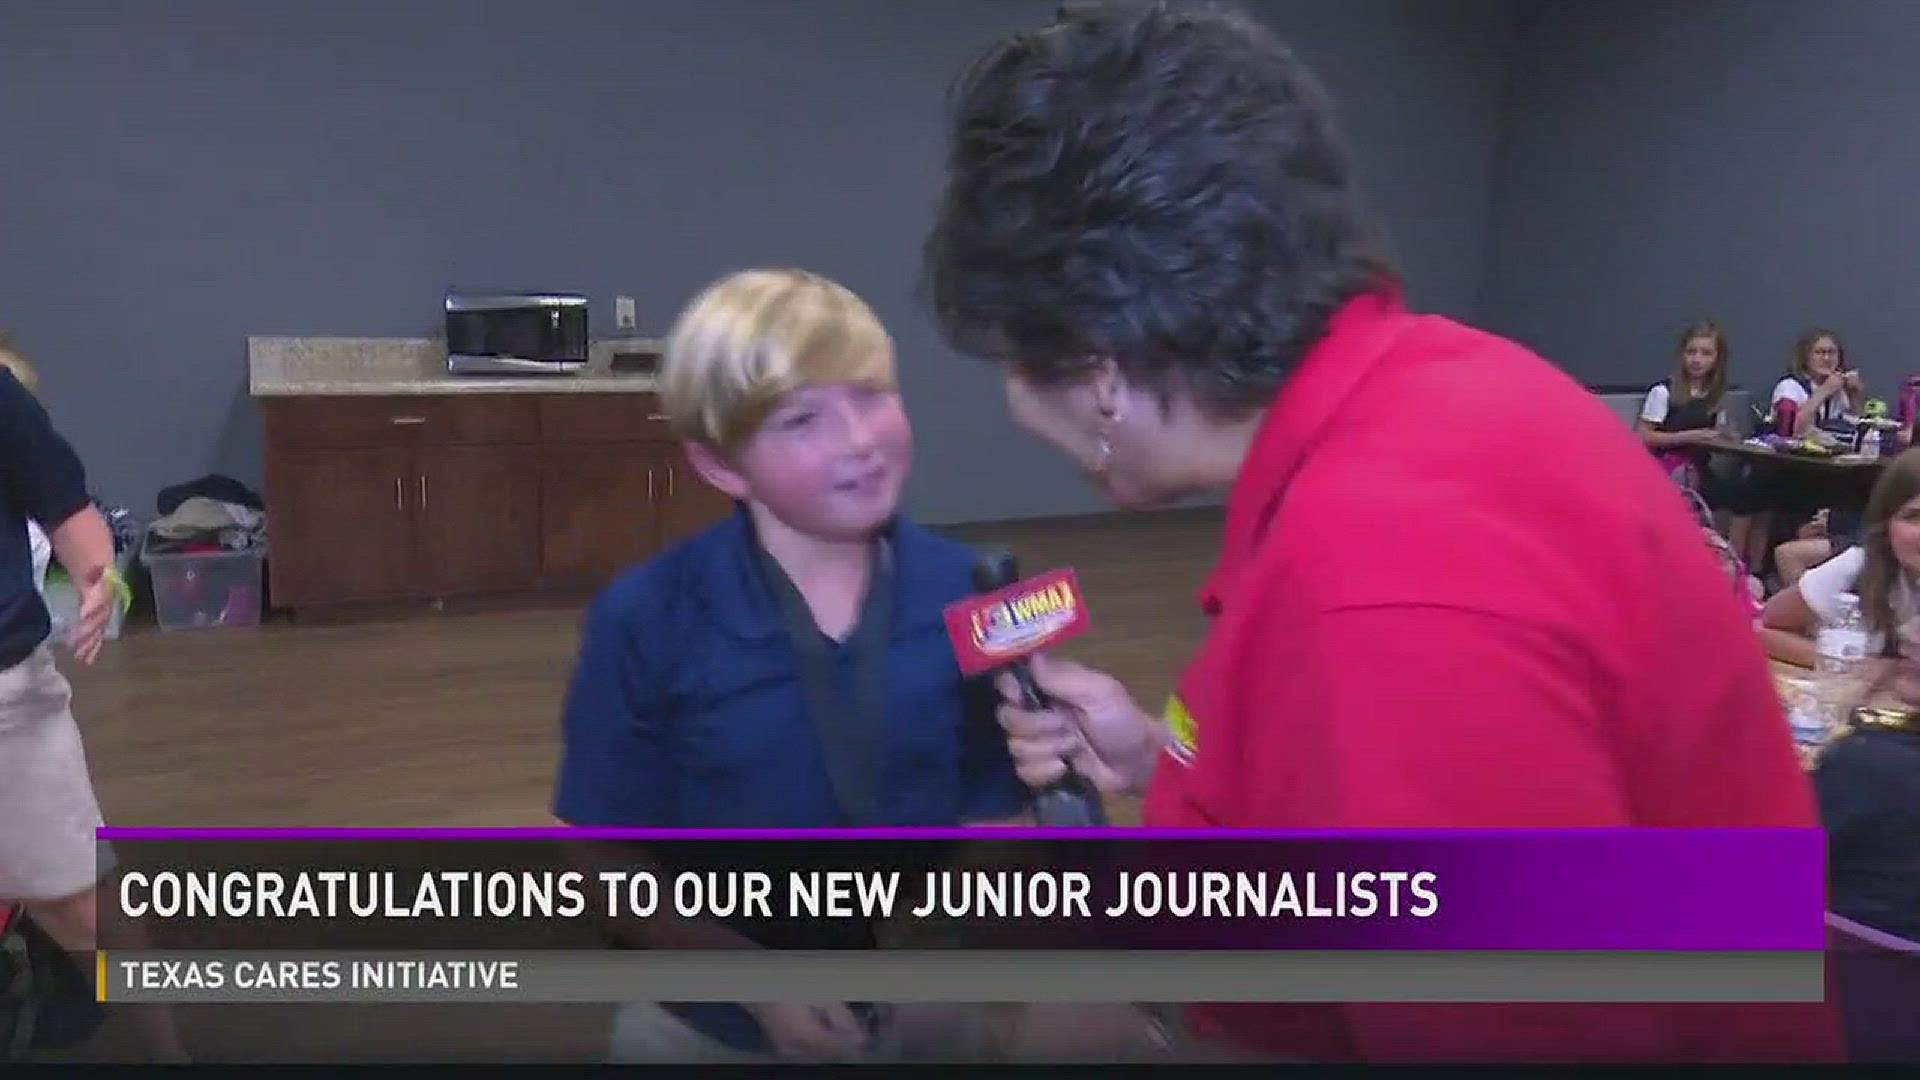 Congratulations to our new Junior Journalists